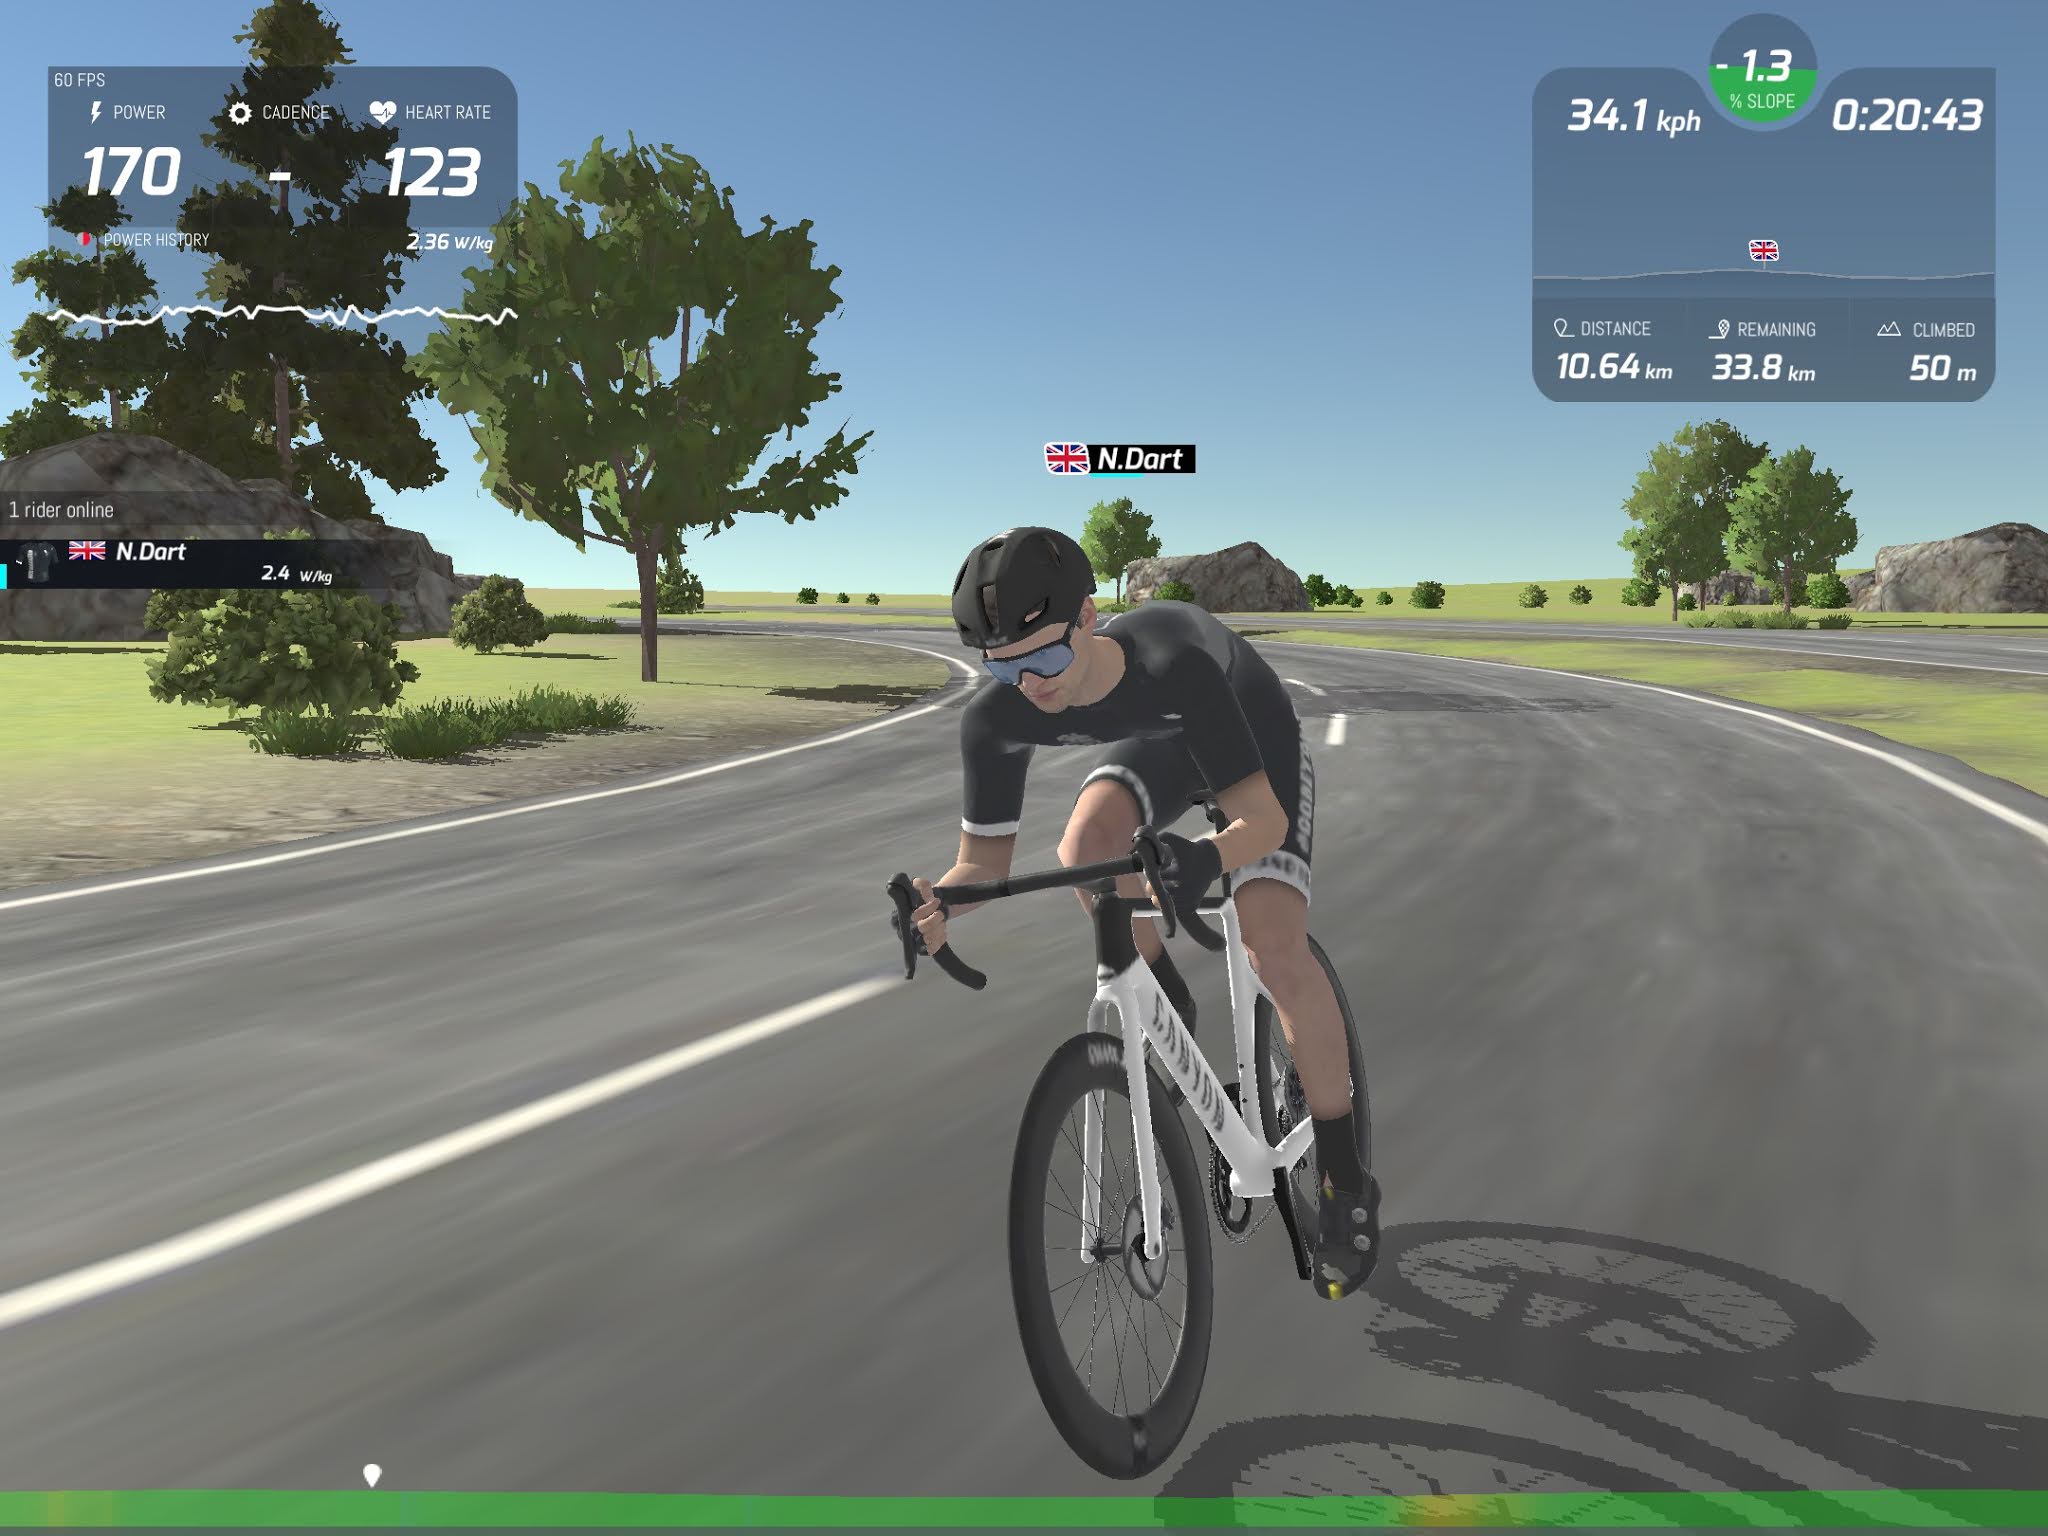 Real life speeds versus virtual cycling speeds ~ More Speed, Less Power